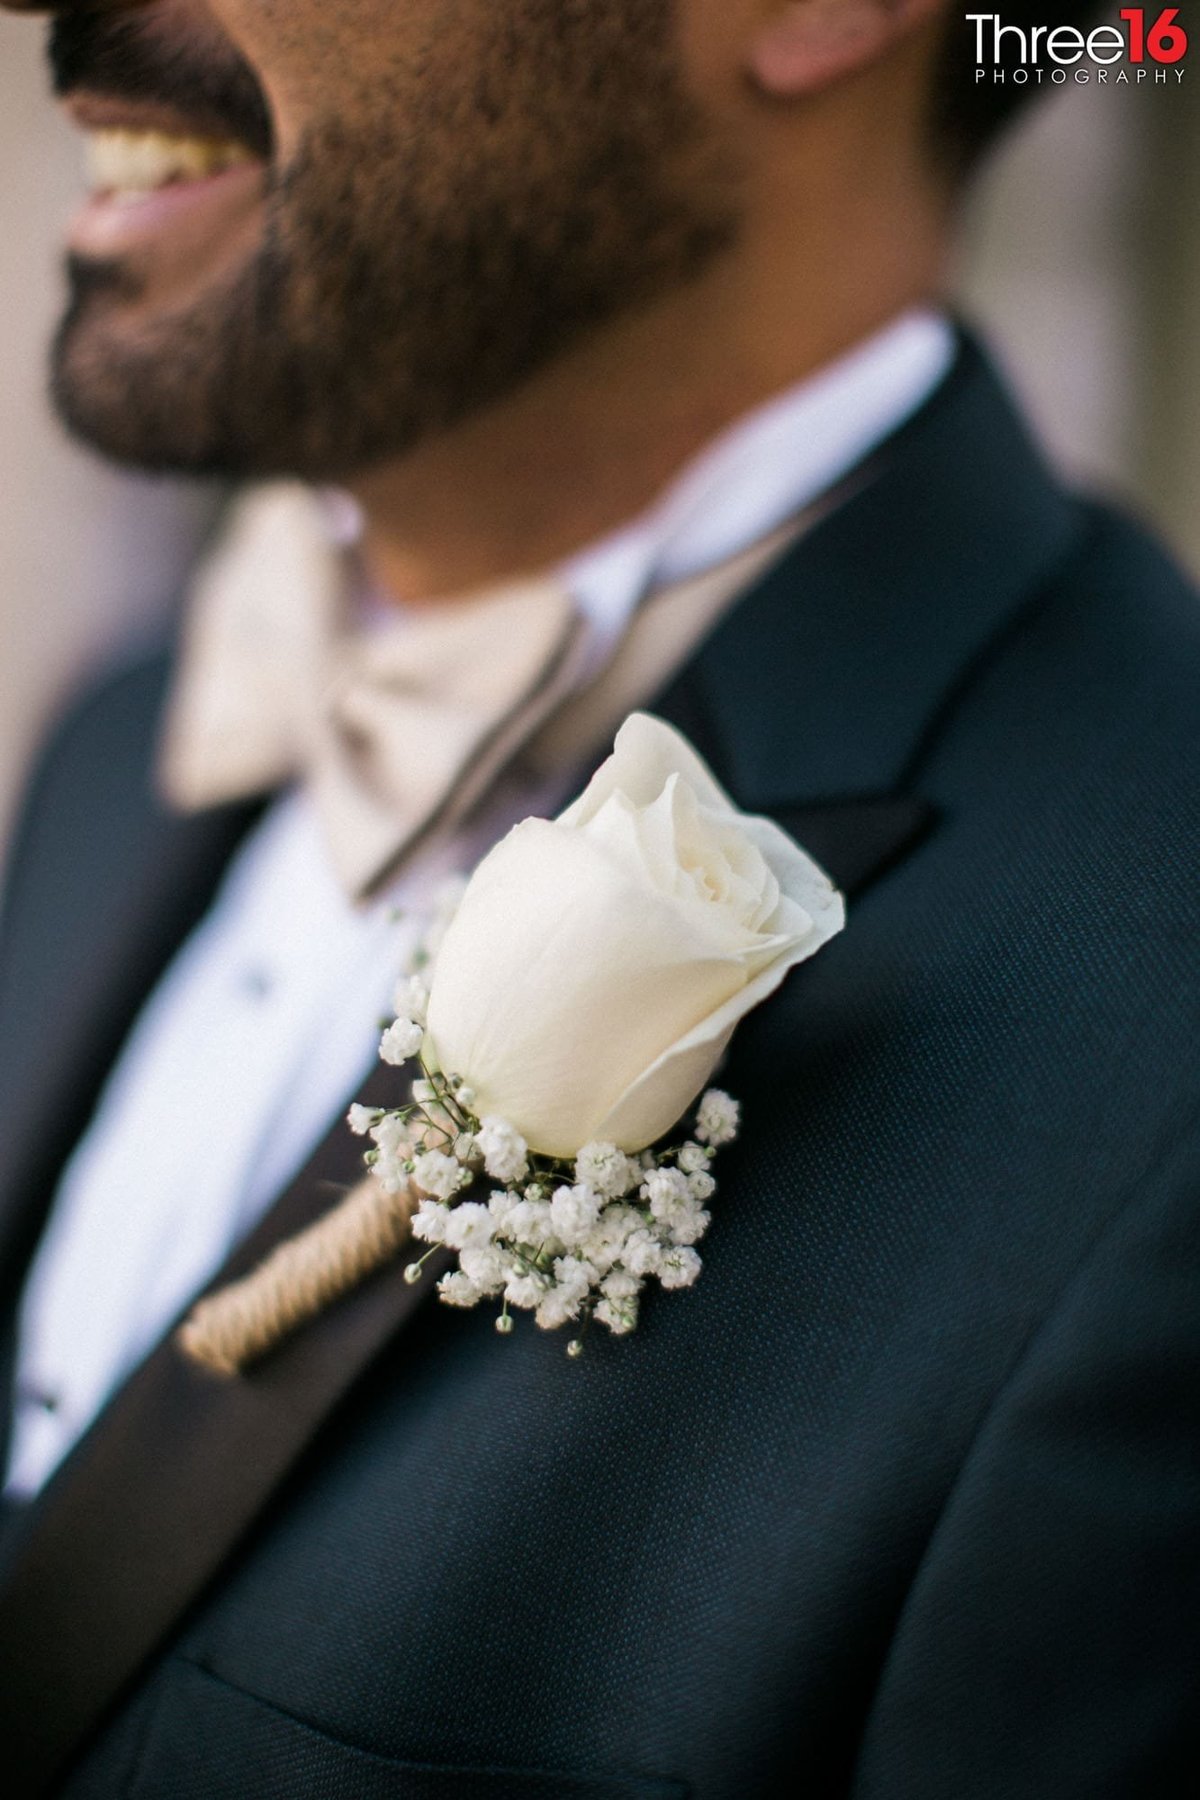 Groom's beautiful white rose boutonniere